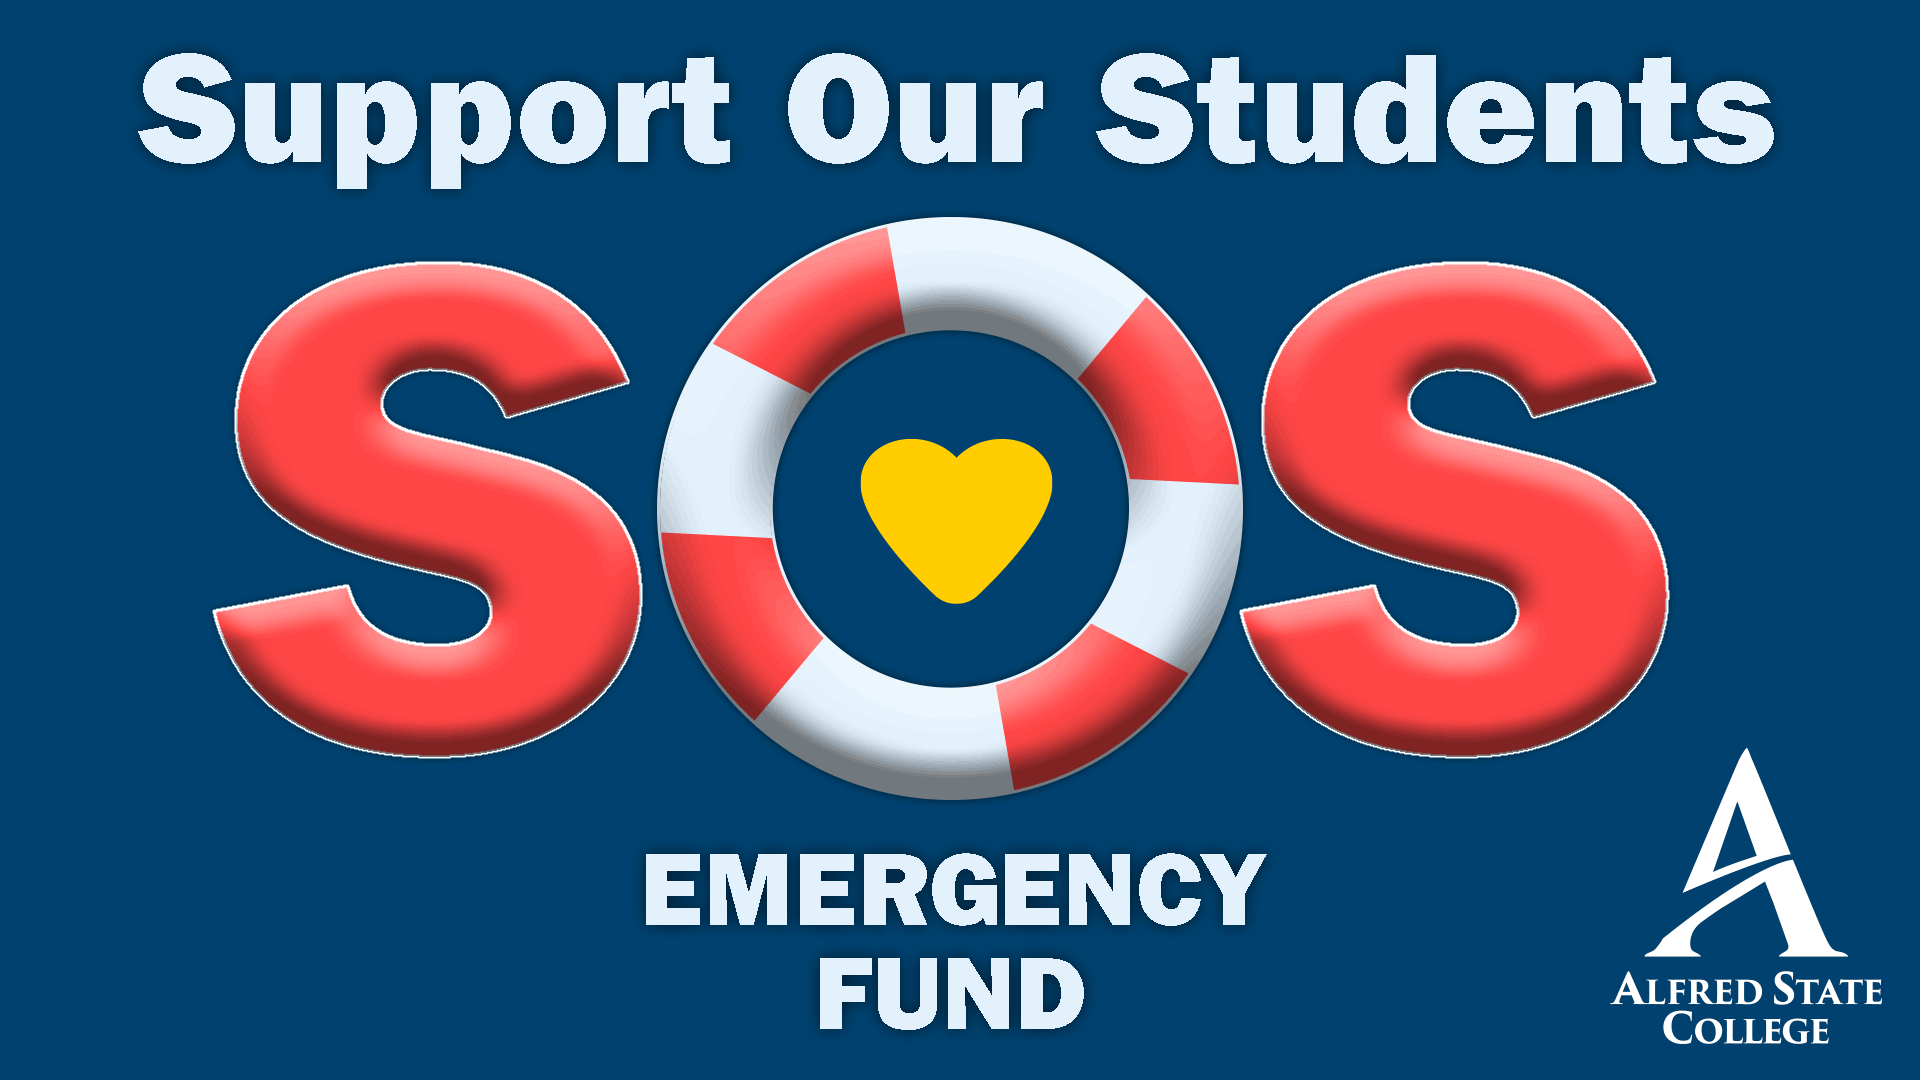 Support our students